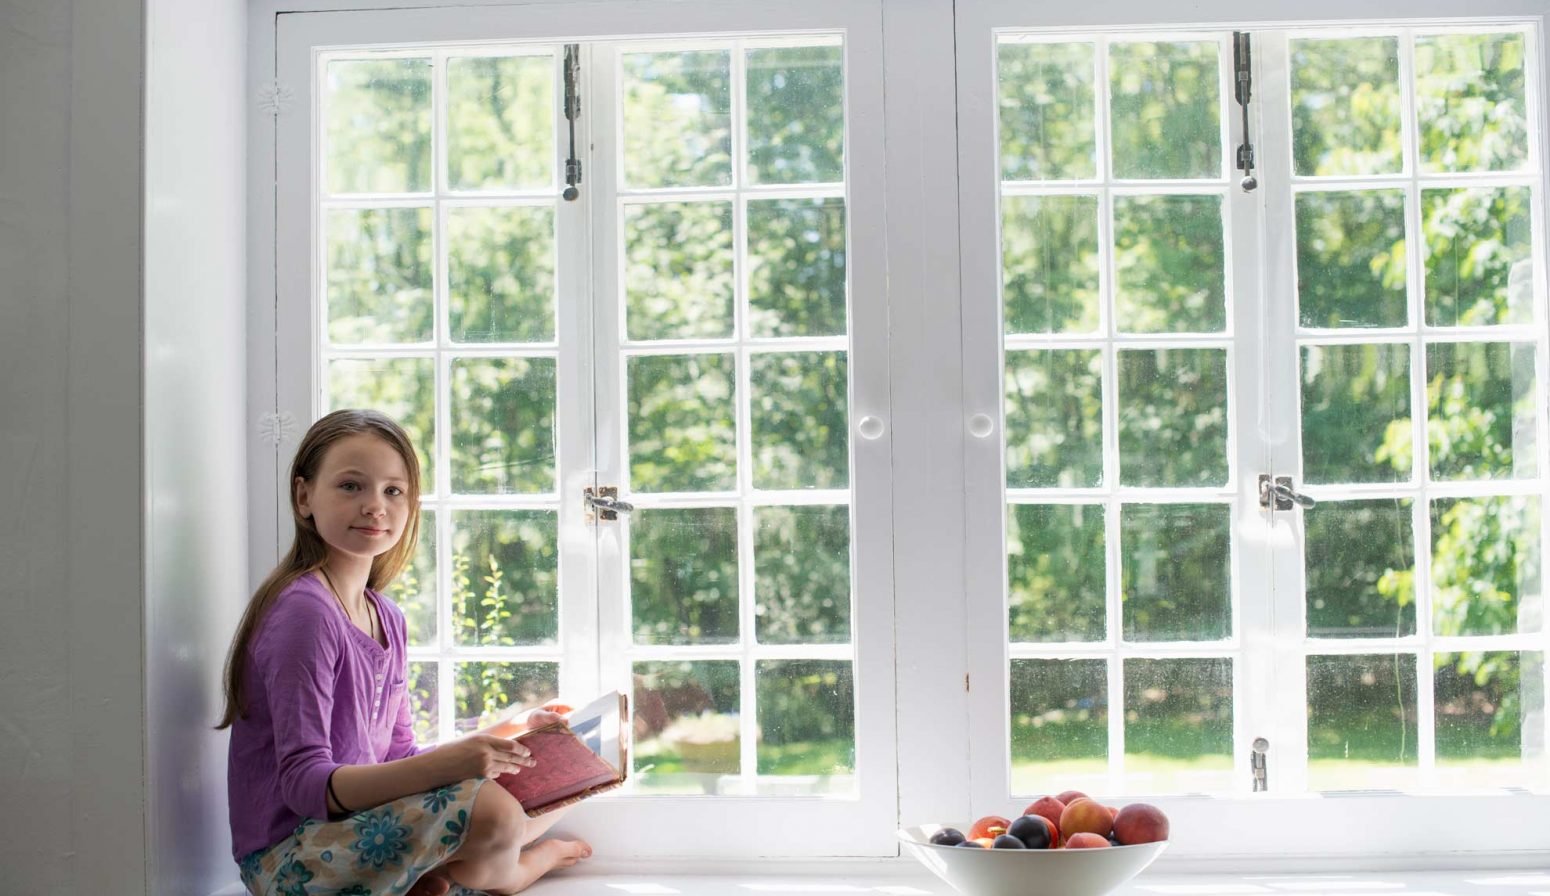 What is the Purpose of Glazing Windows?